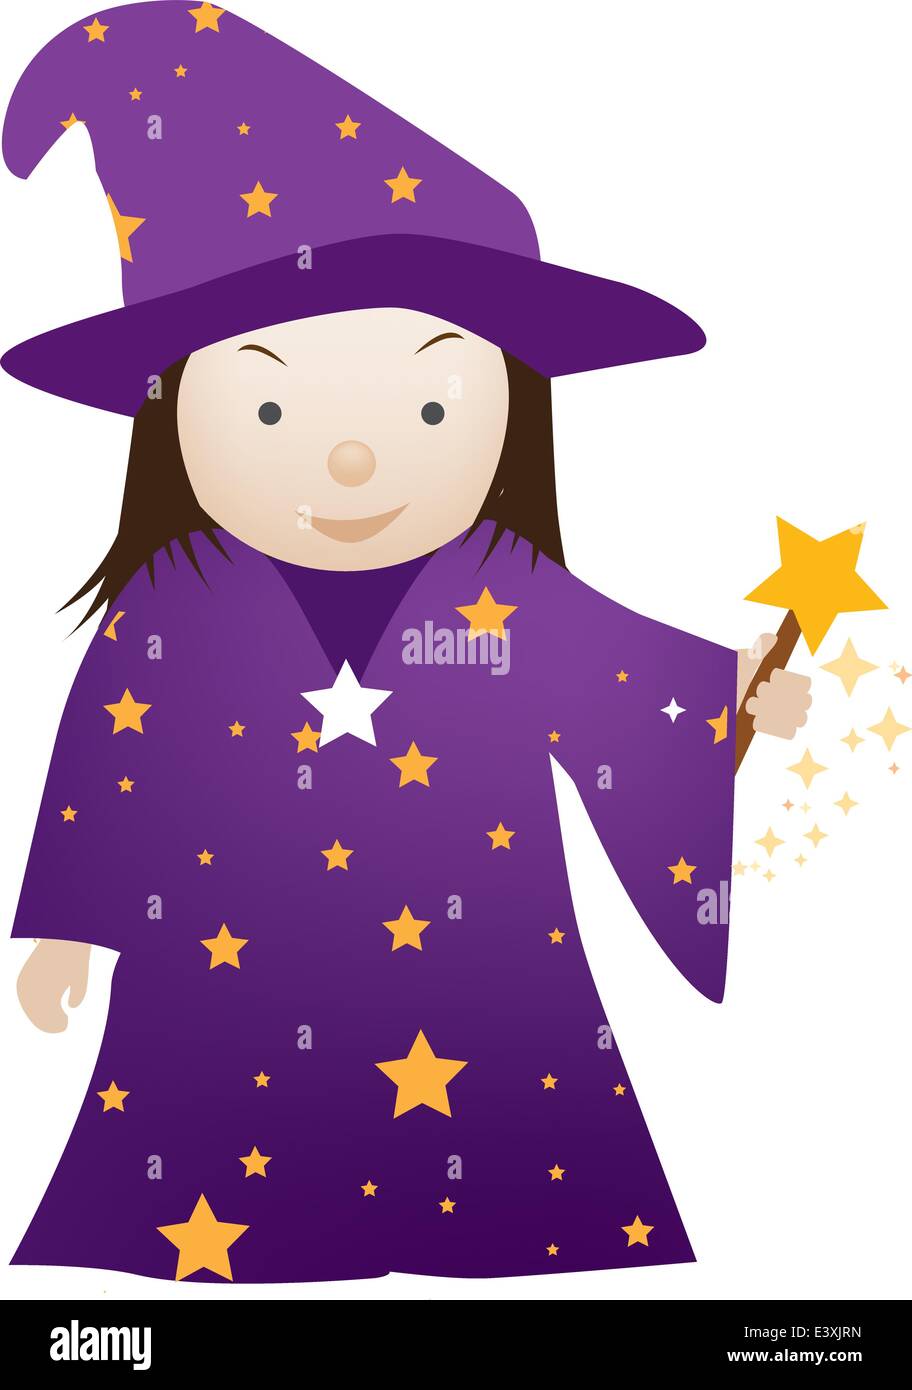 illustration of a little child dressed up as a wizard Stock Vector